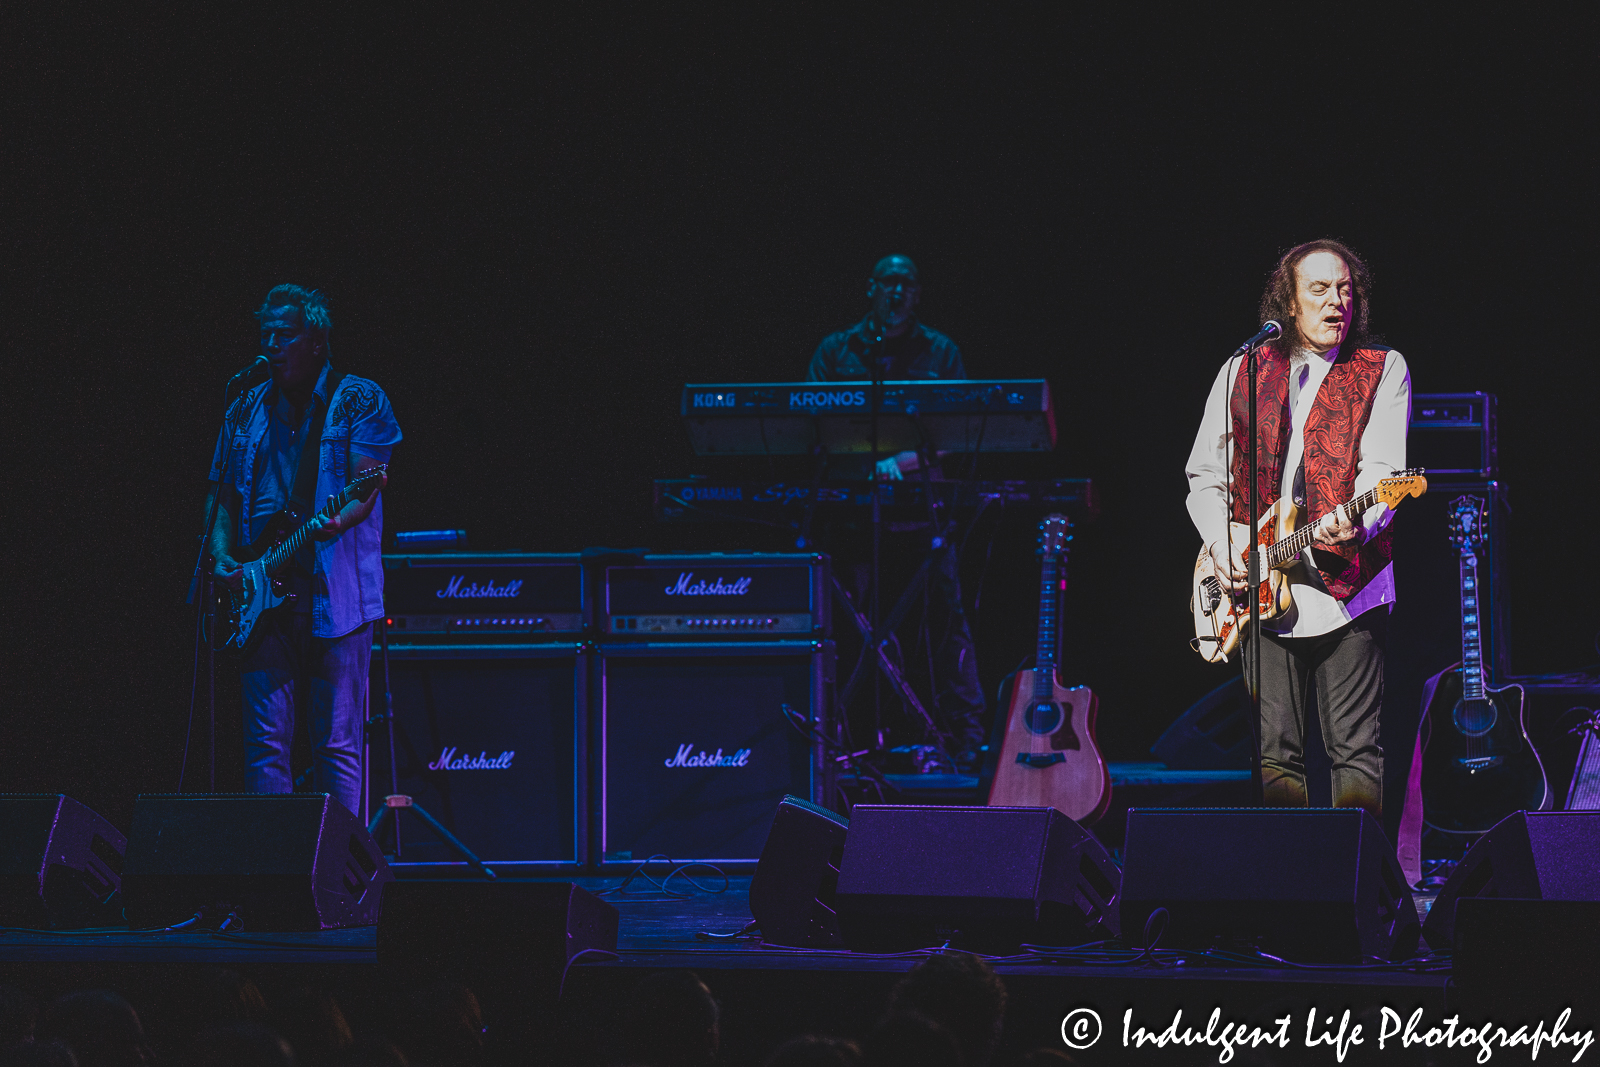 Tommy James performing live with The Shondells at Kauffman Center for the Performing Arts in downtown Kansas City, MO on April 1, 2023.